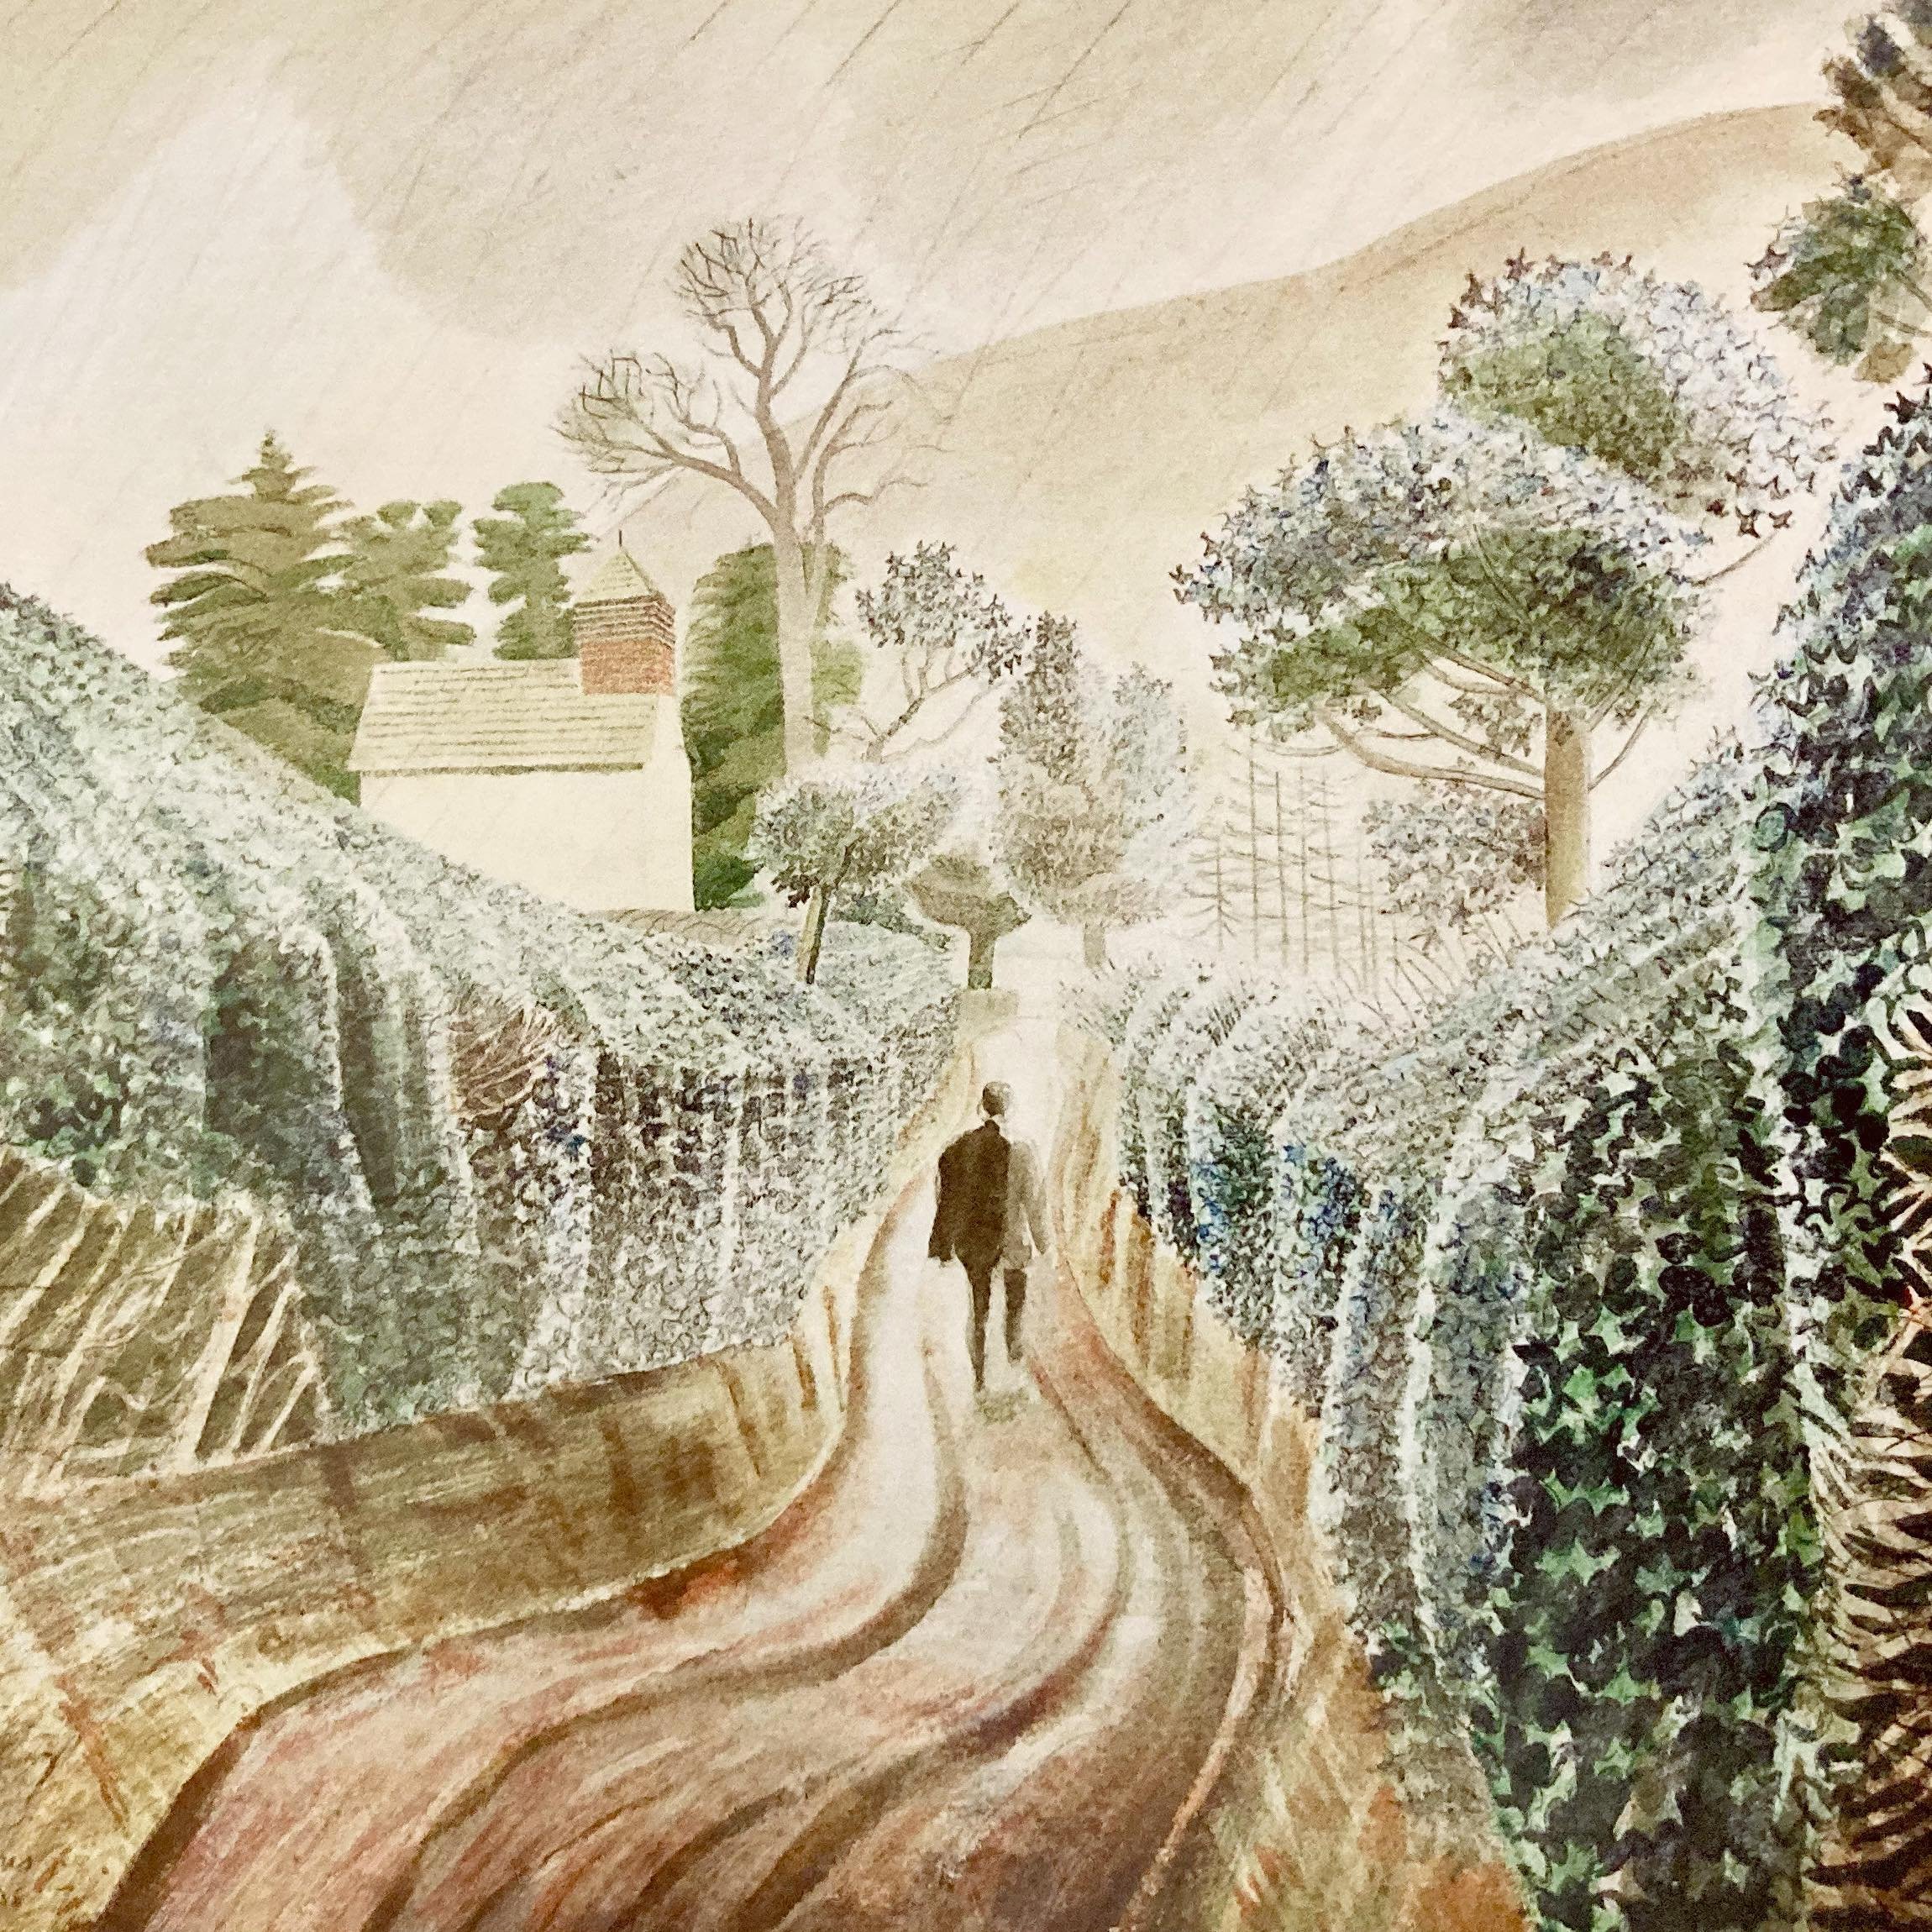 &ldquo;Between thick hedges a solitary figure walks down a lane towards a simple church surrounded by trees. A steep hill rises ahead. Rain is falling, making the surface of the lane gleam dully, but there is nevertheless a radiance in the sky, and c